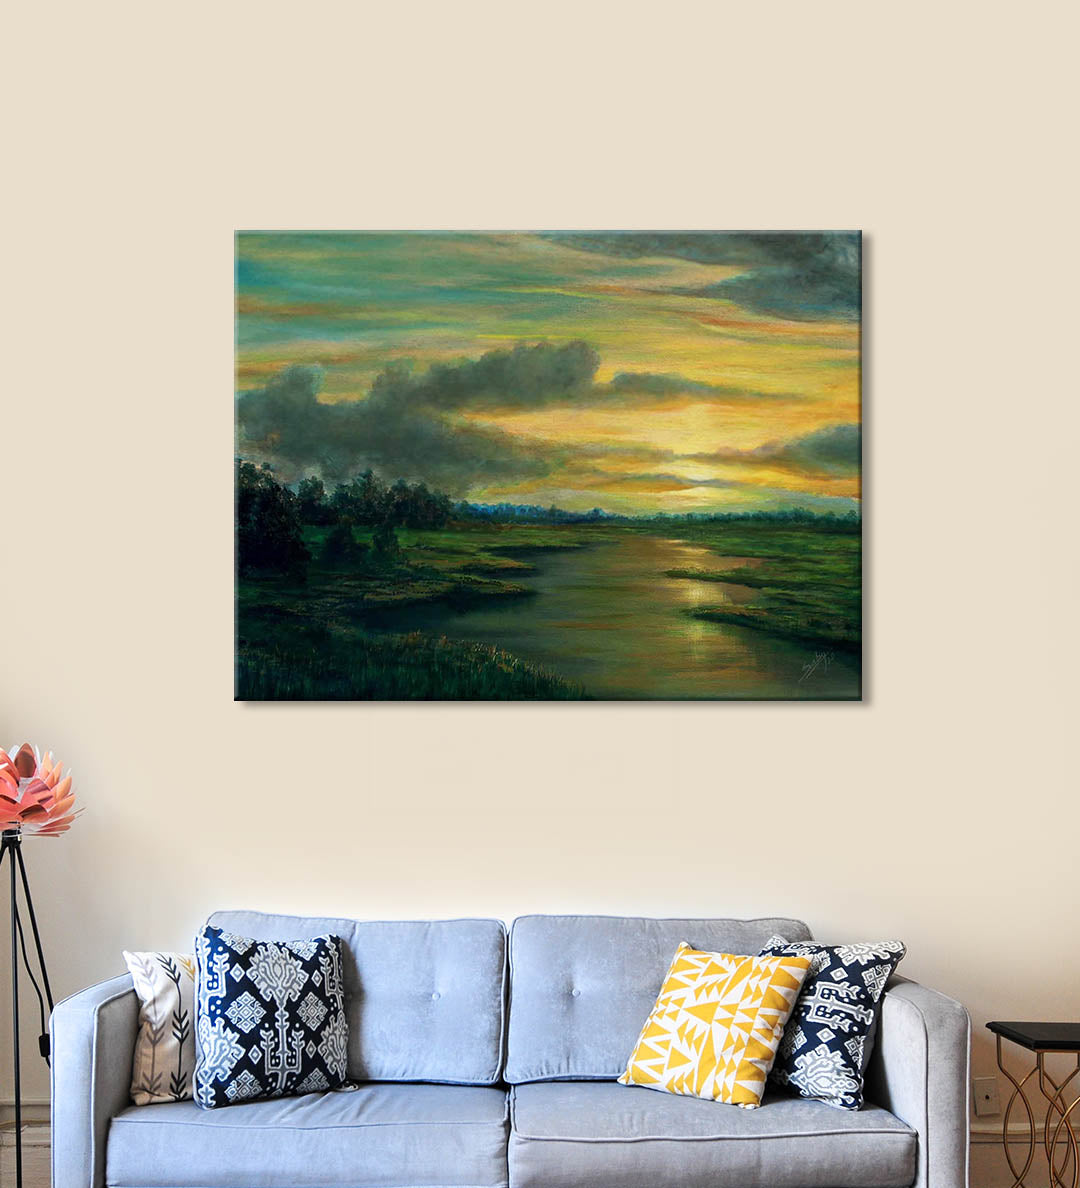 Colors of Evening - Wall Decor - 1